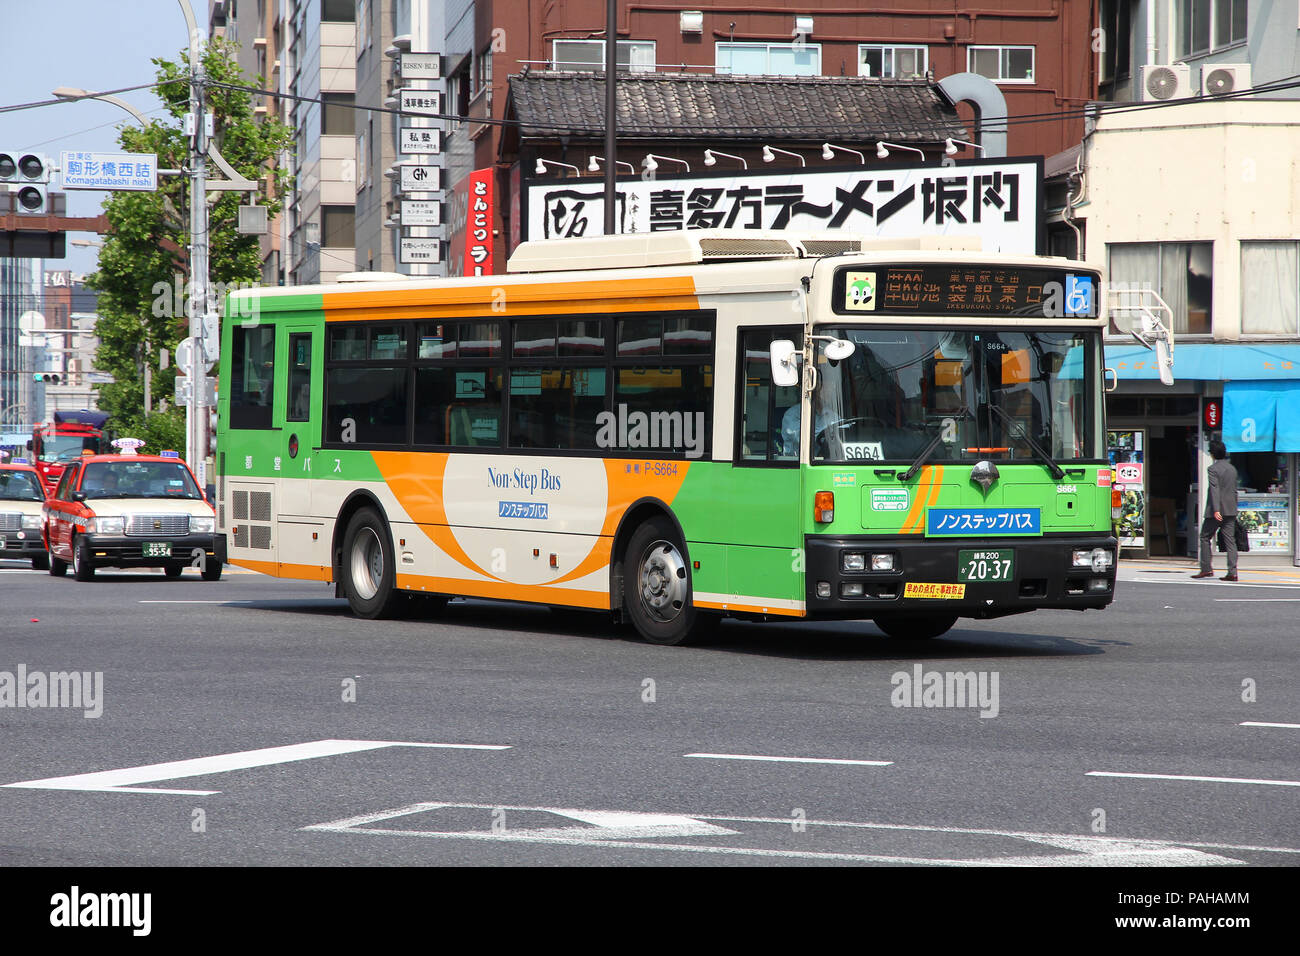 Hino Bus High Resolution Stock Photography and Images - Alamy